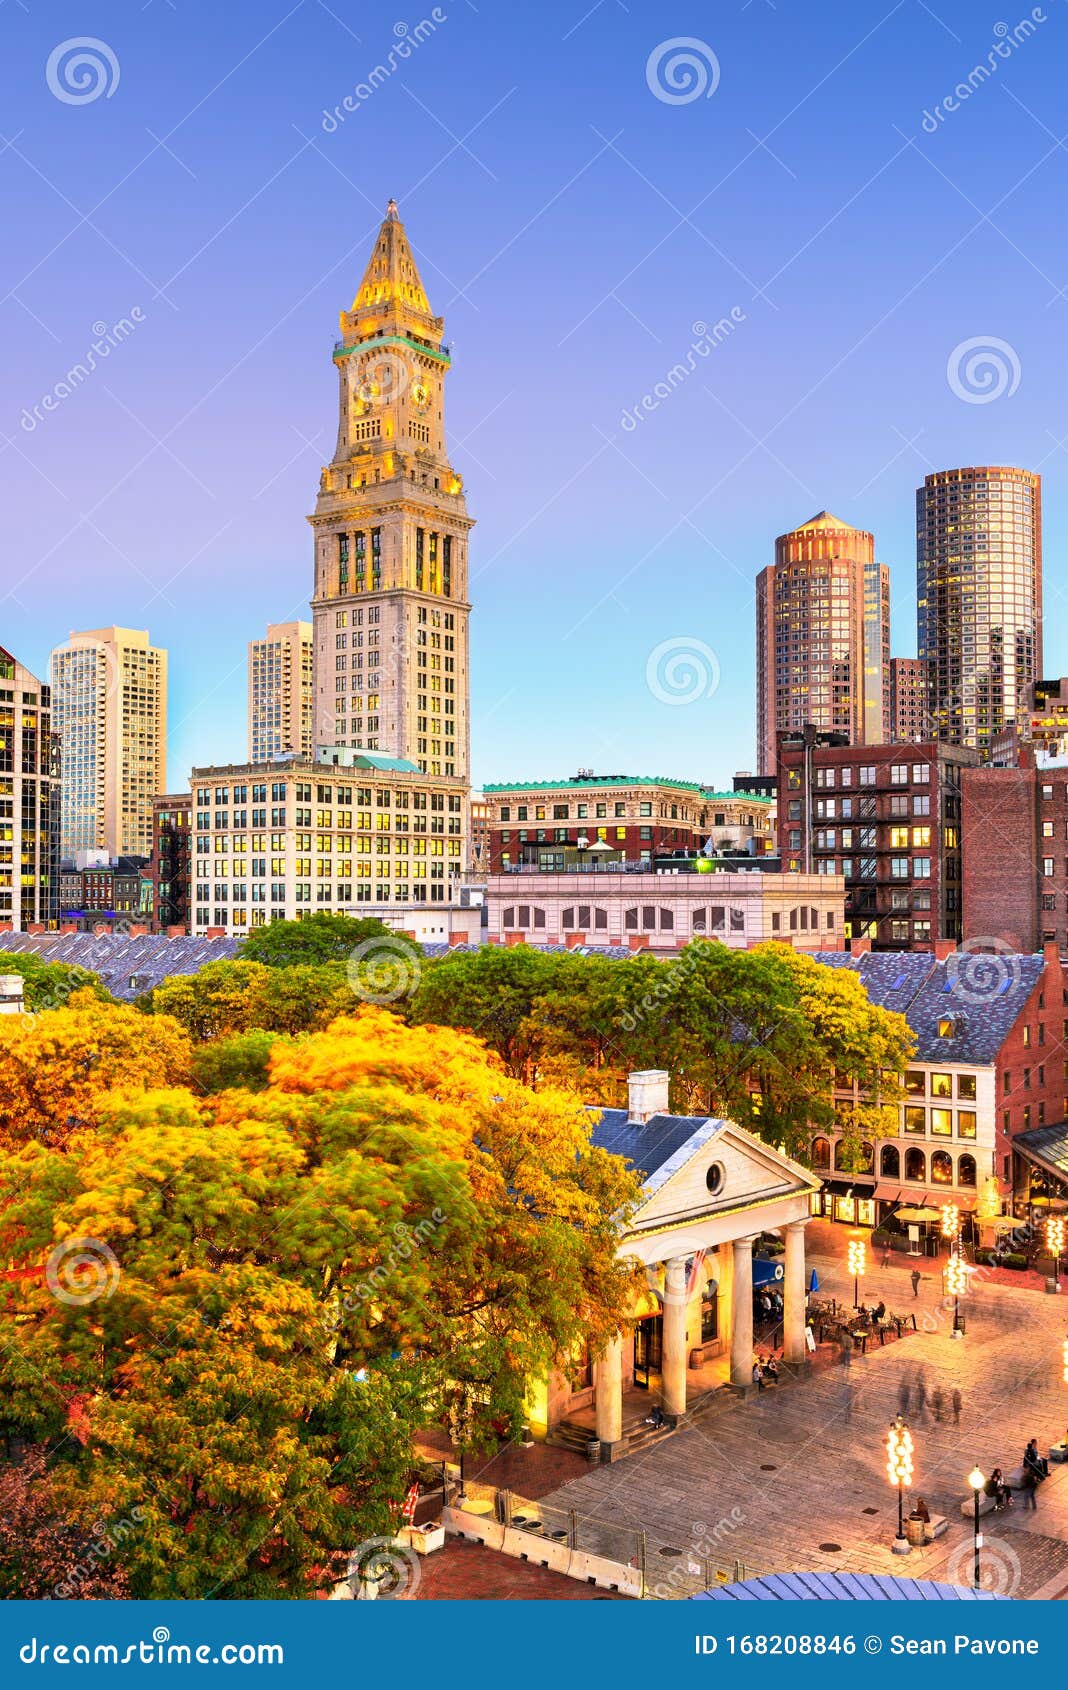 boston, massachusetts, usa skyline with faneuil hall and quincy market